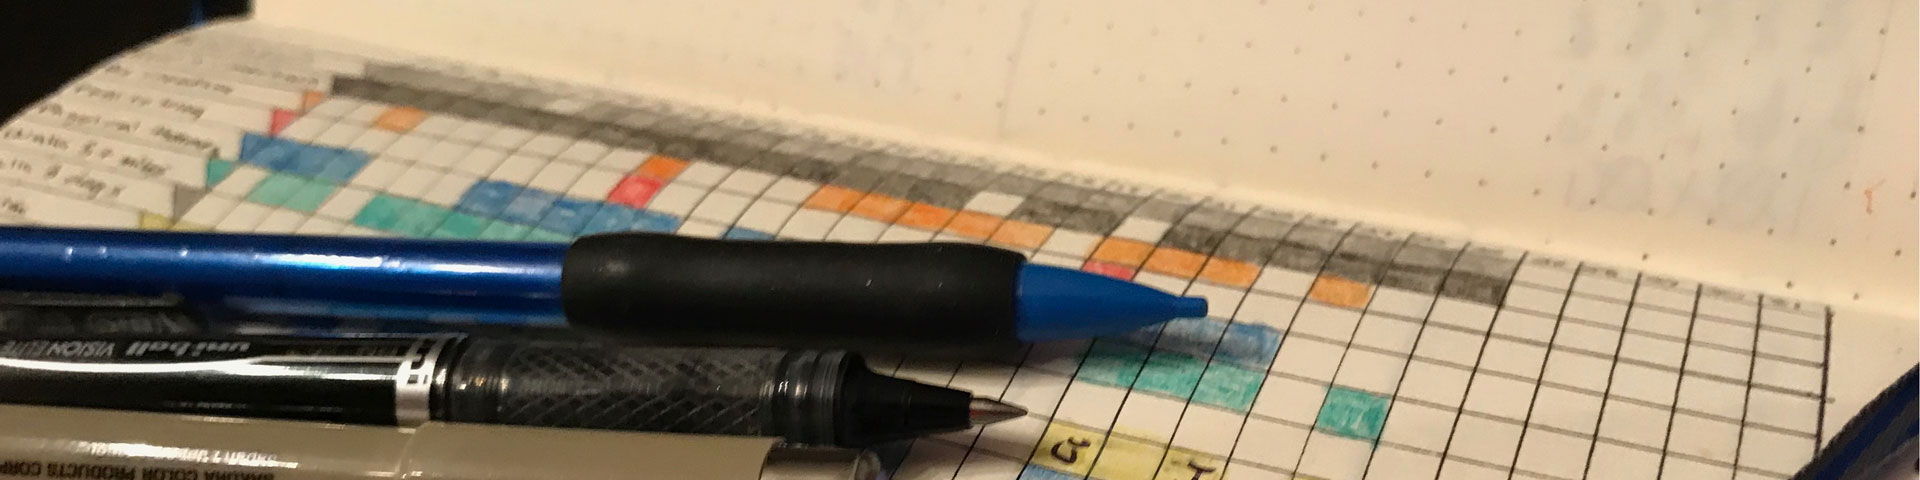 Three pens sitting on a grid-style bullet journal notebook. The colored squares of a habit tracker appear in the background.